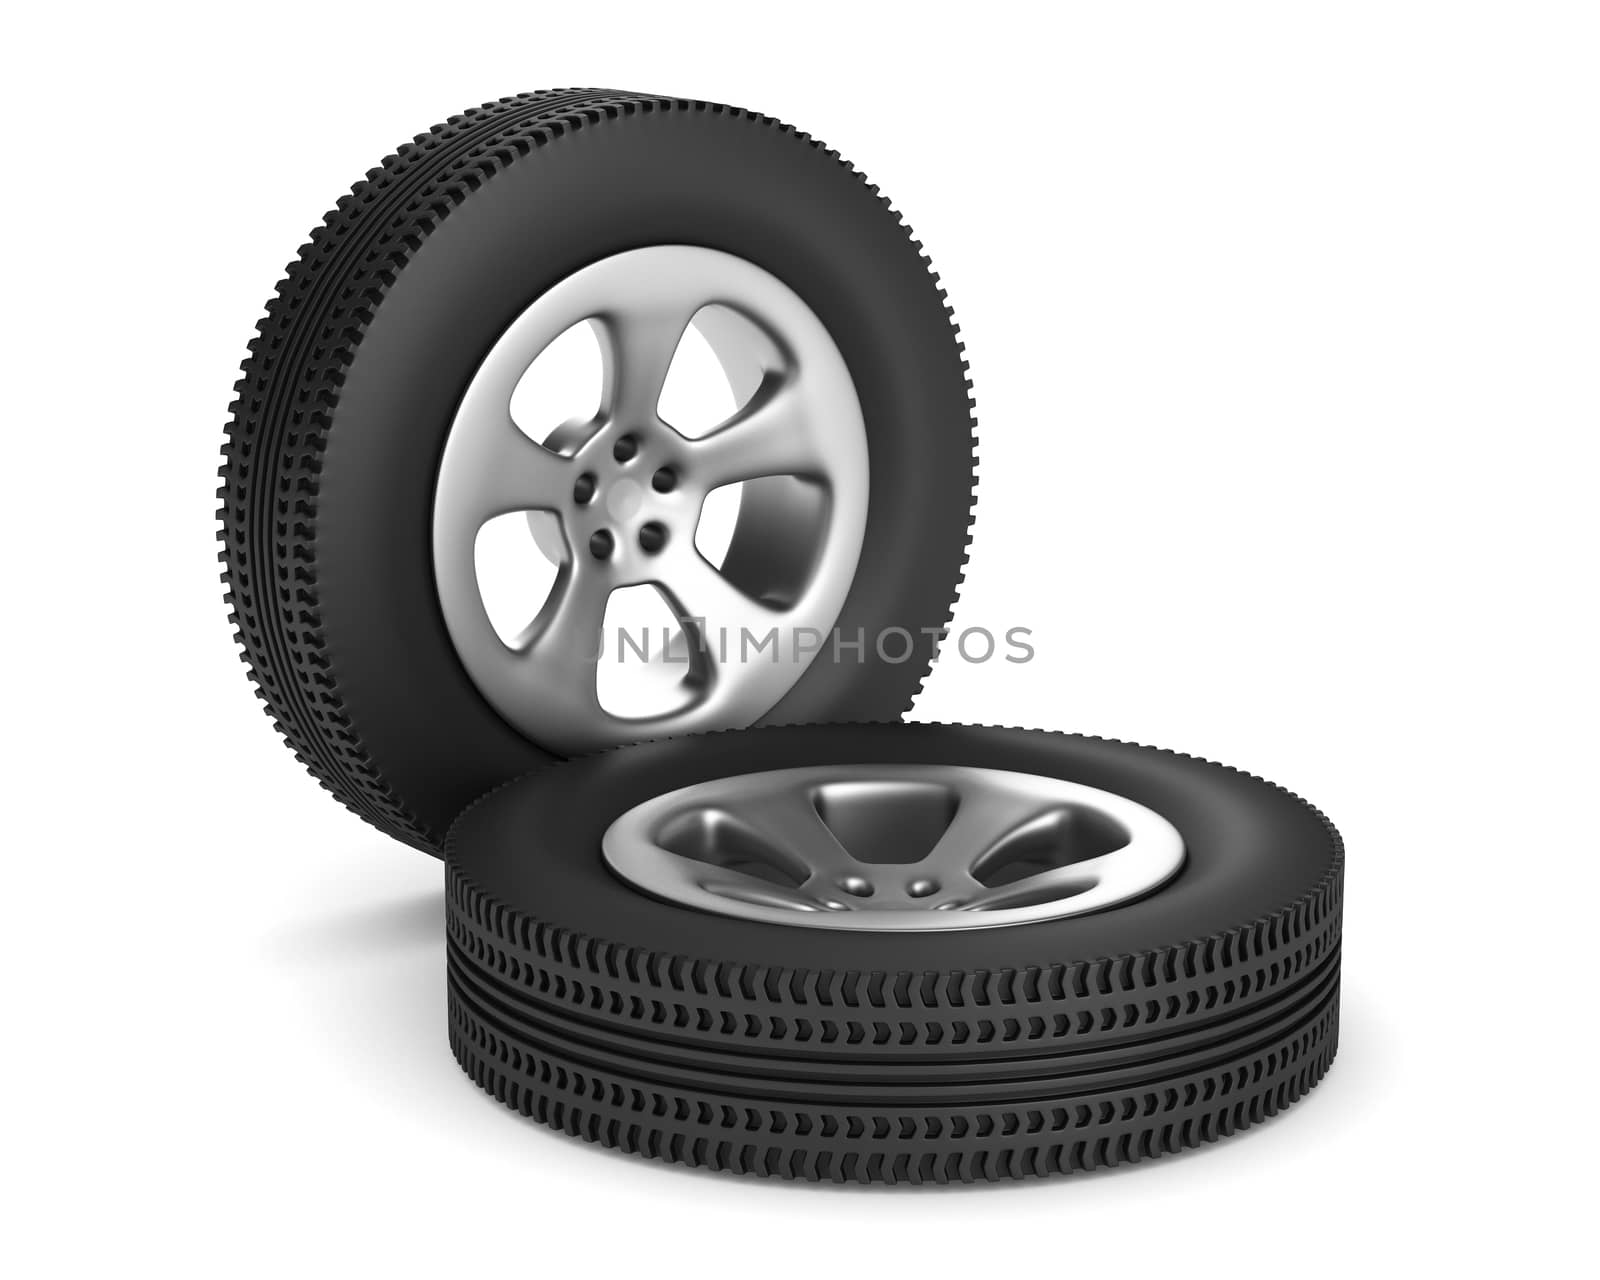 two disk wheel on white background. Isolated 3D image by ISerg